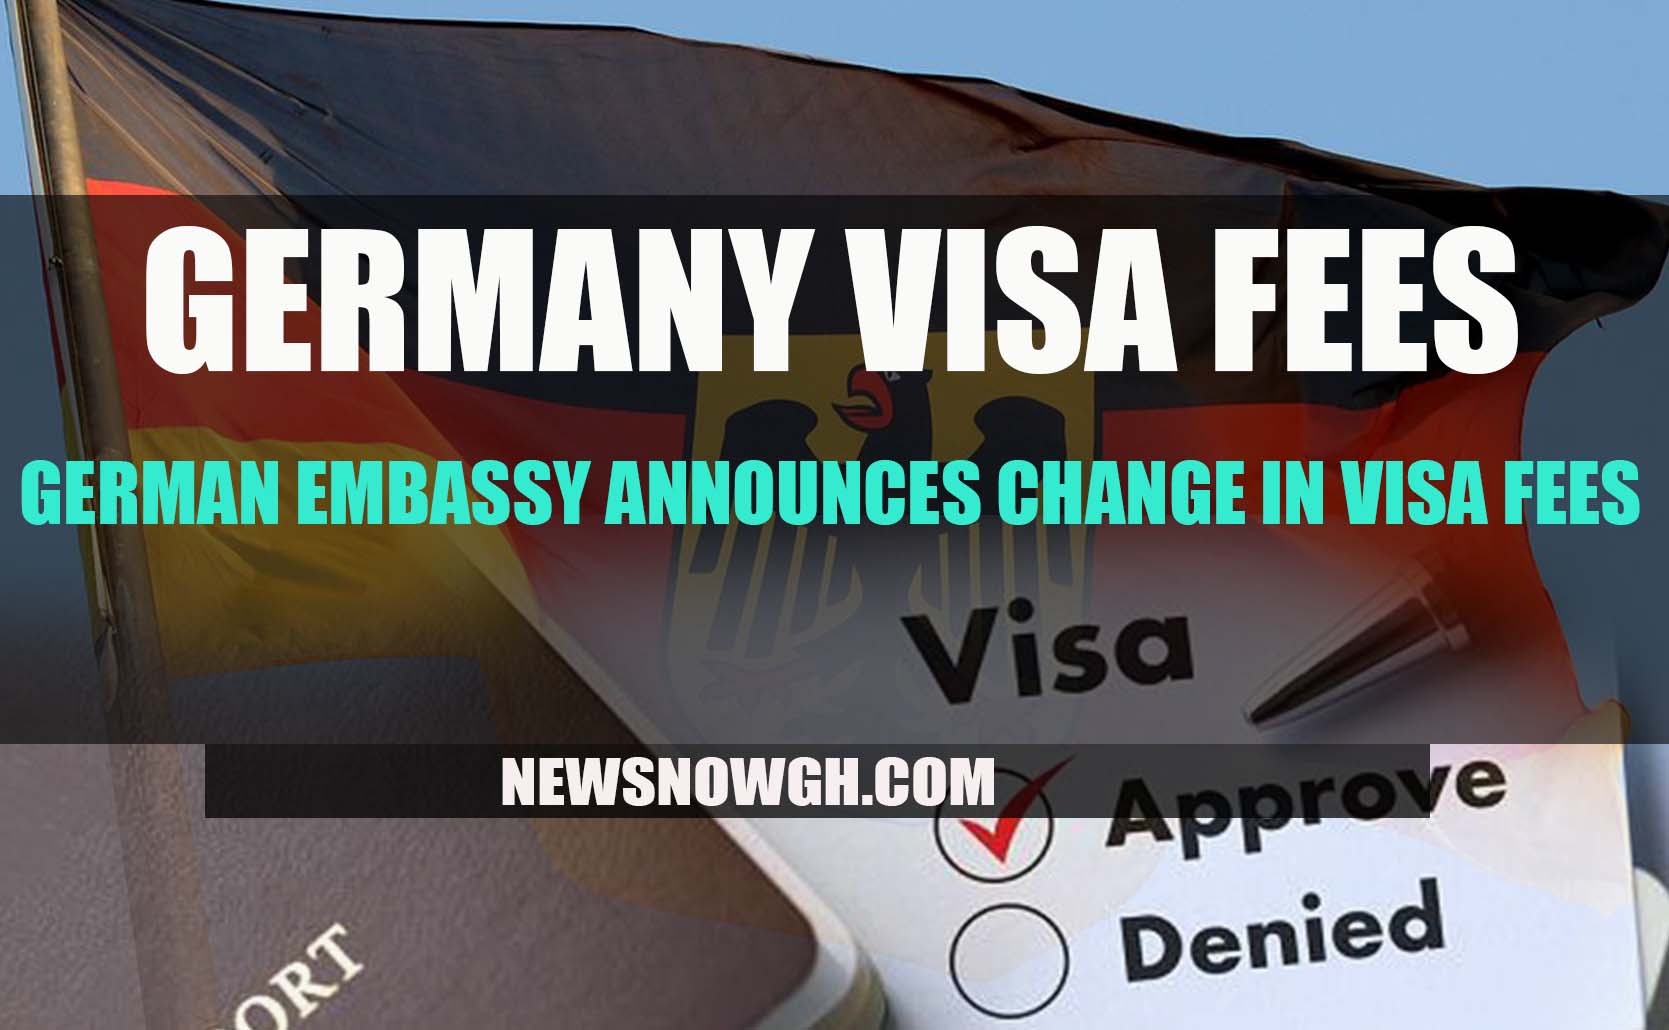 germany tourist visa fees from russia